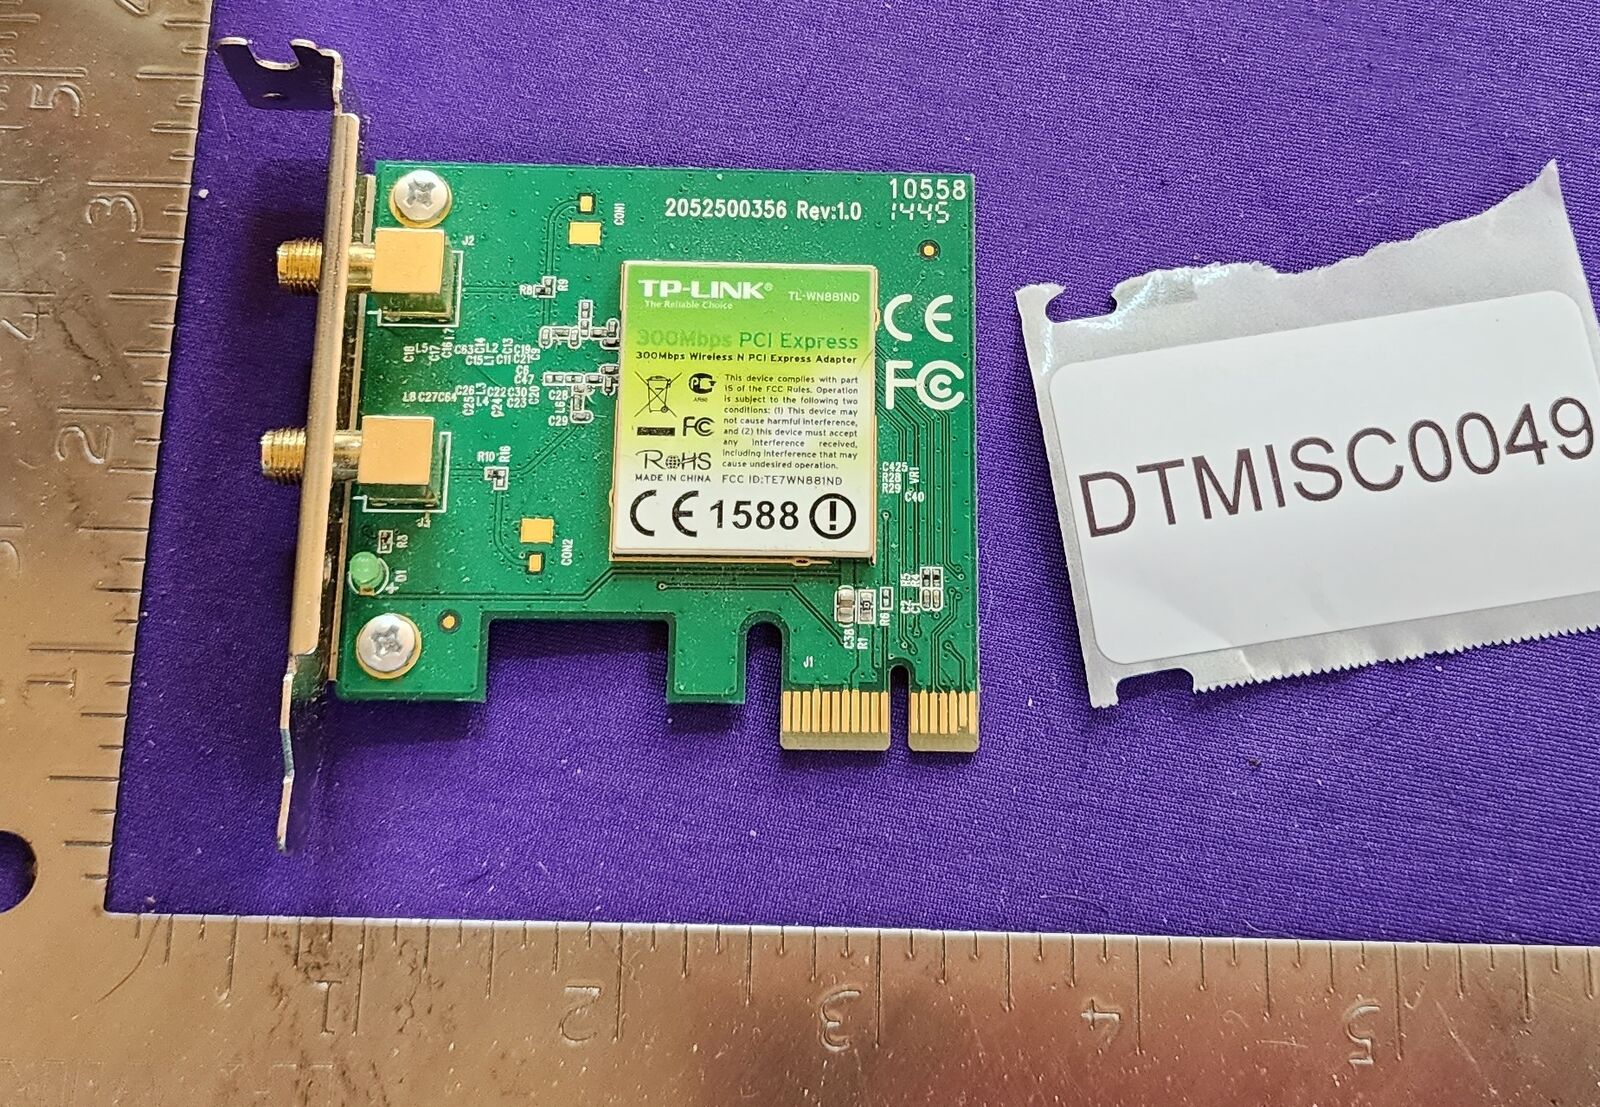 DTMISC0049 - TP-Link TL-WN881ND N300 PCI-E Wireless Low Profile WLAN Card